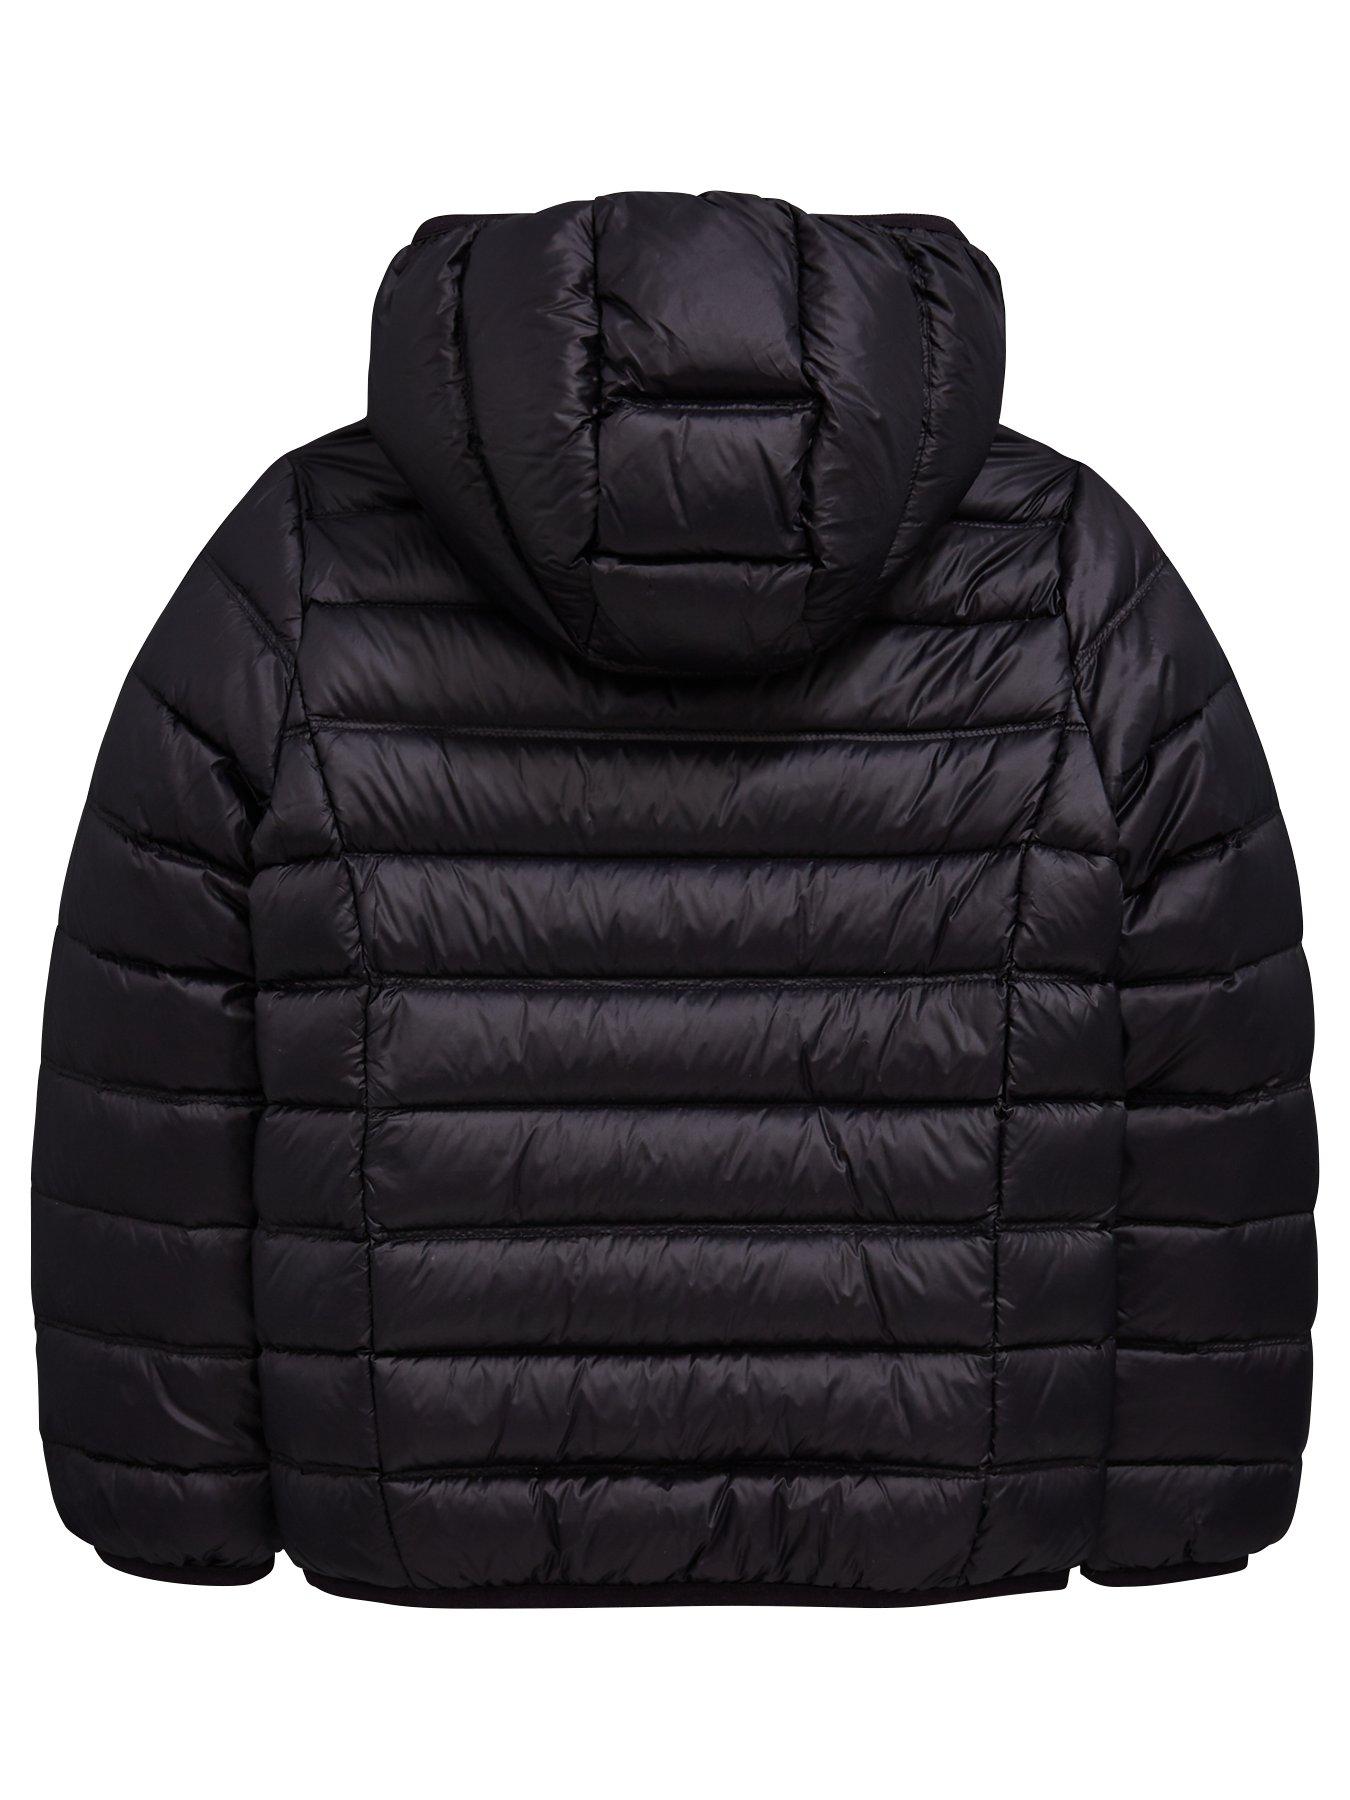 EA7 Emporio Armani Boys Lightweight Down Quilted Jacket - Black 